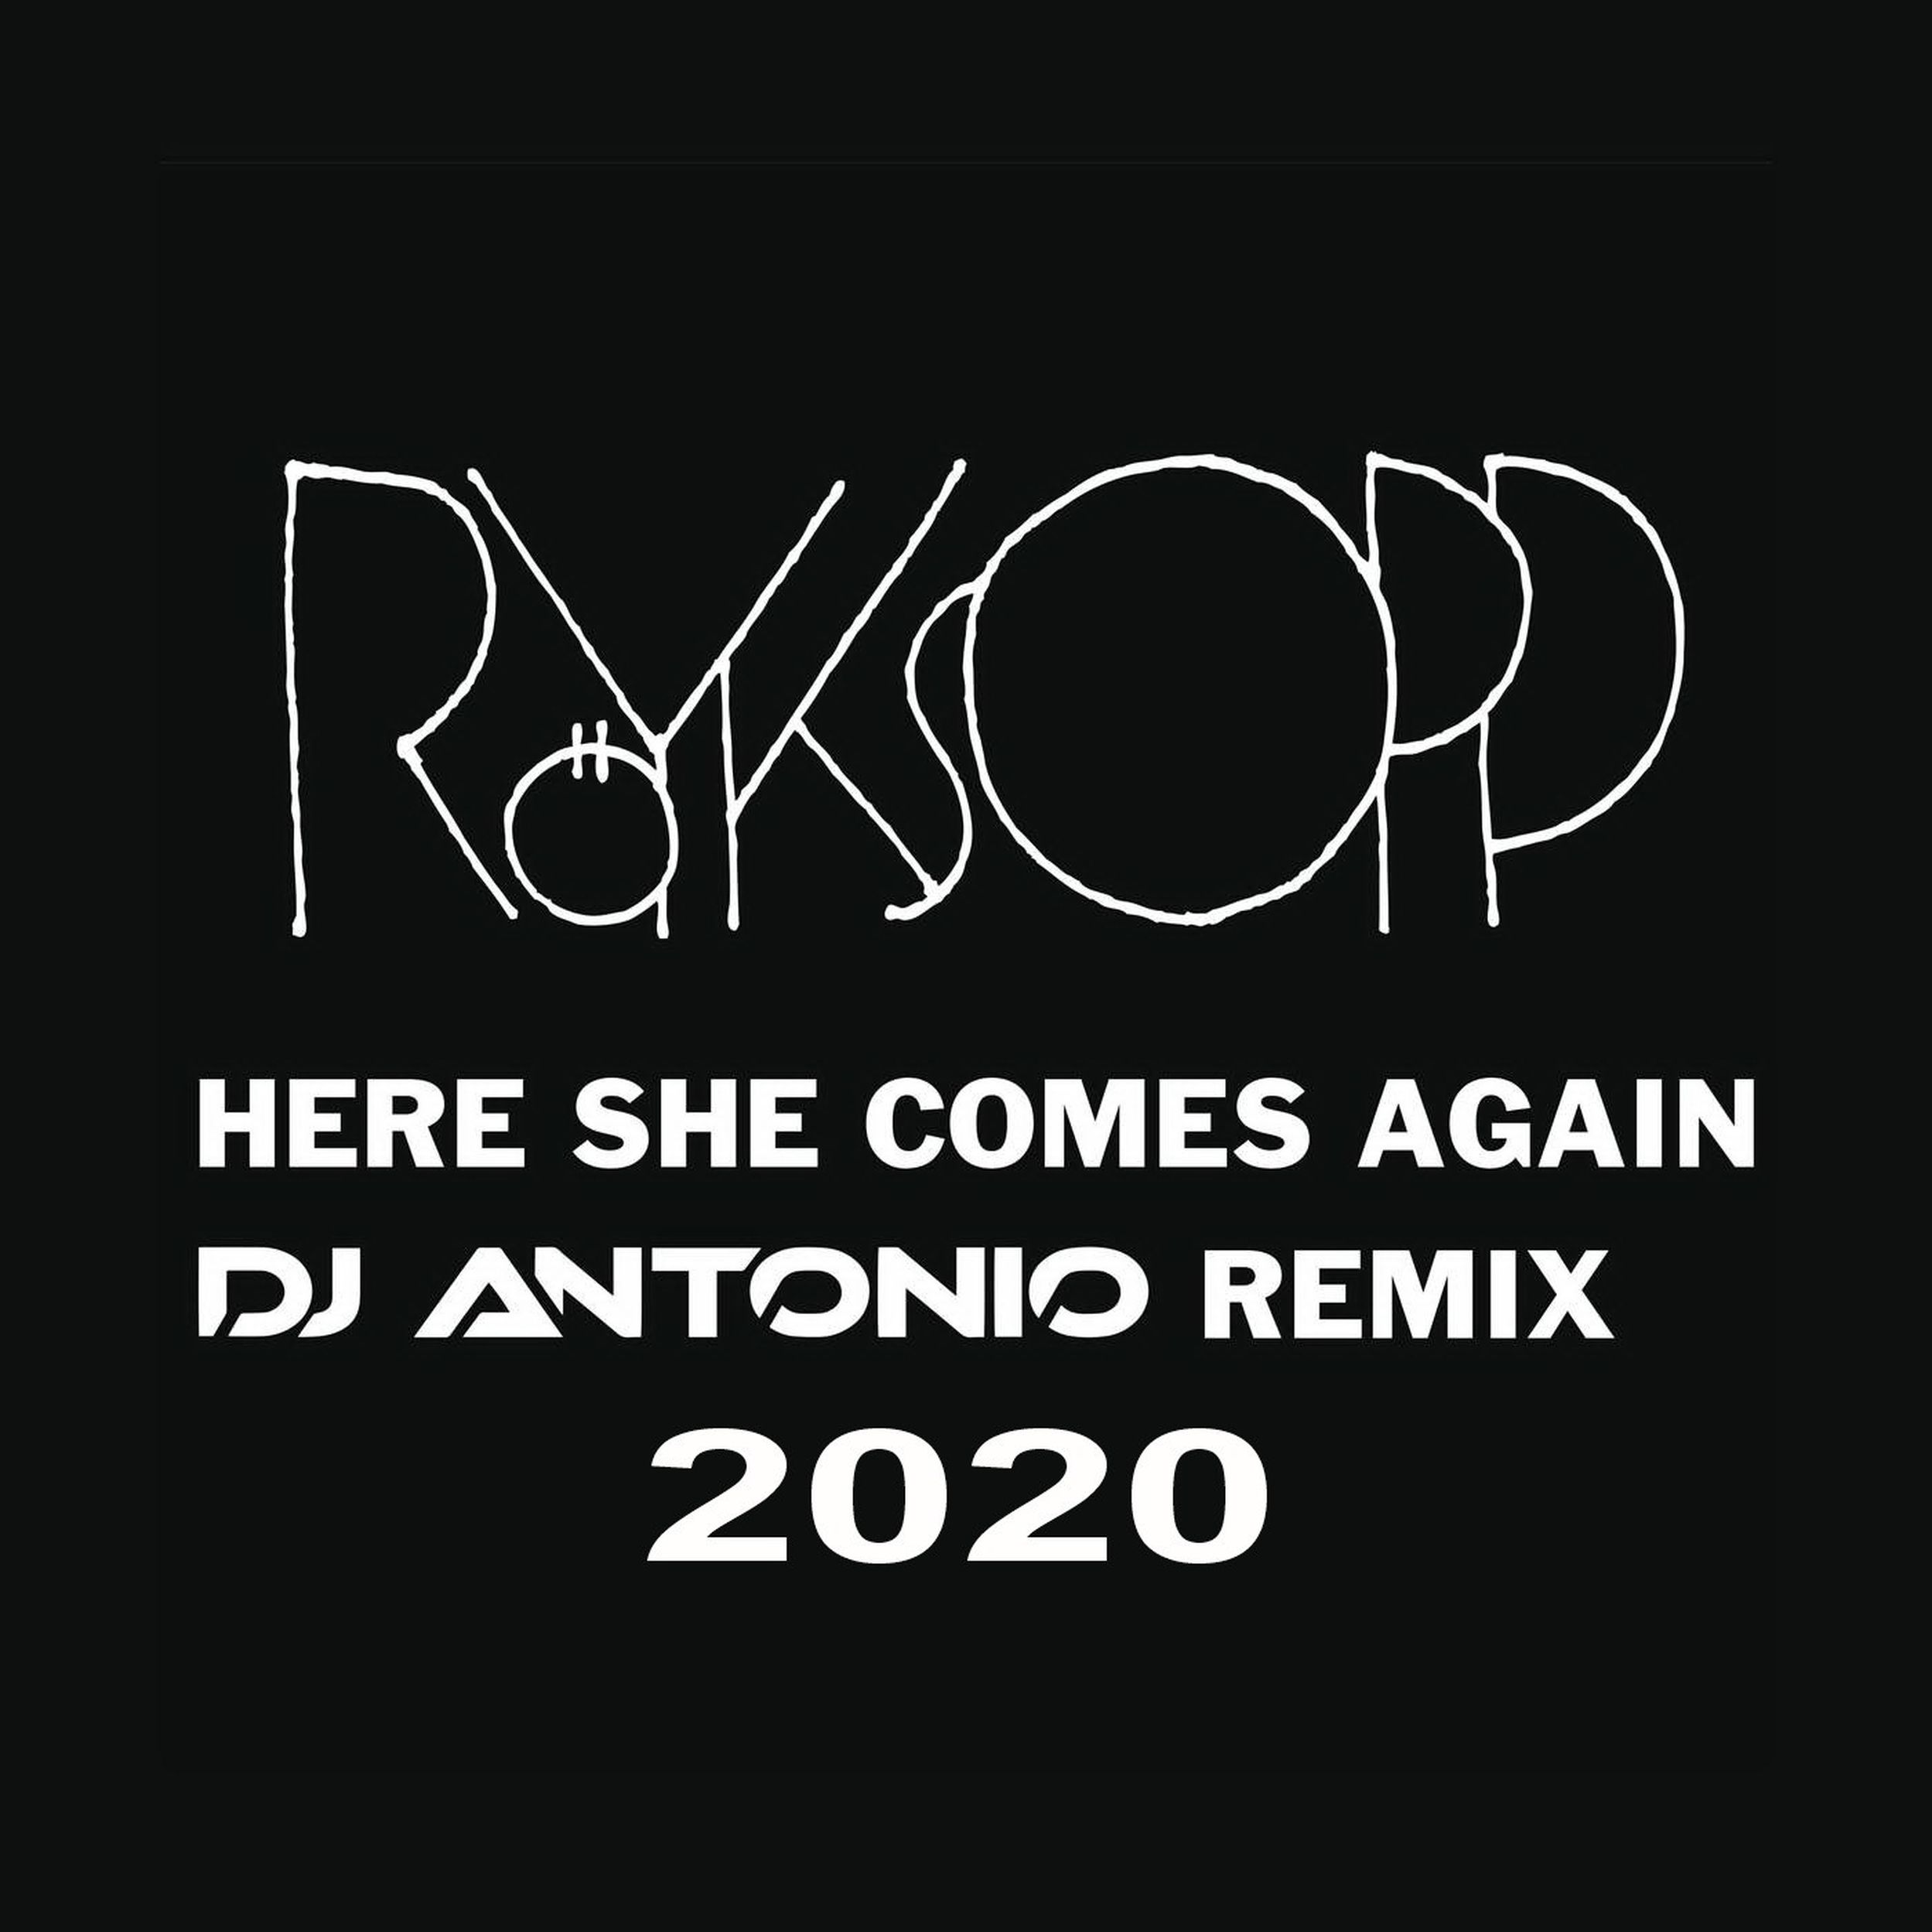 Royksopp comes again remix. Here she comes again. Here she comes again (DJ Antonio Remix). Royksopp here she comes again. Royksopp here comes again.